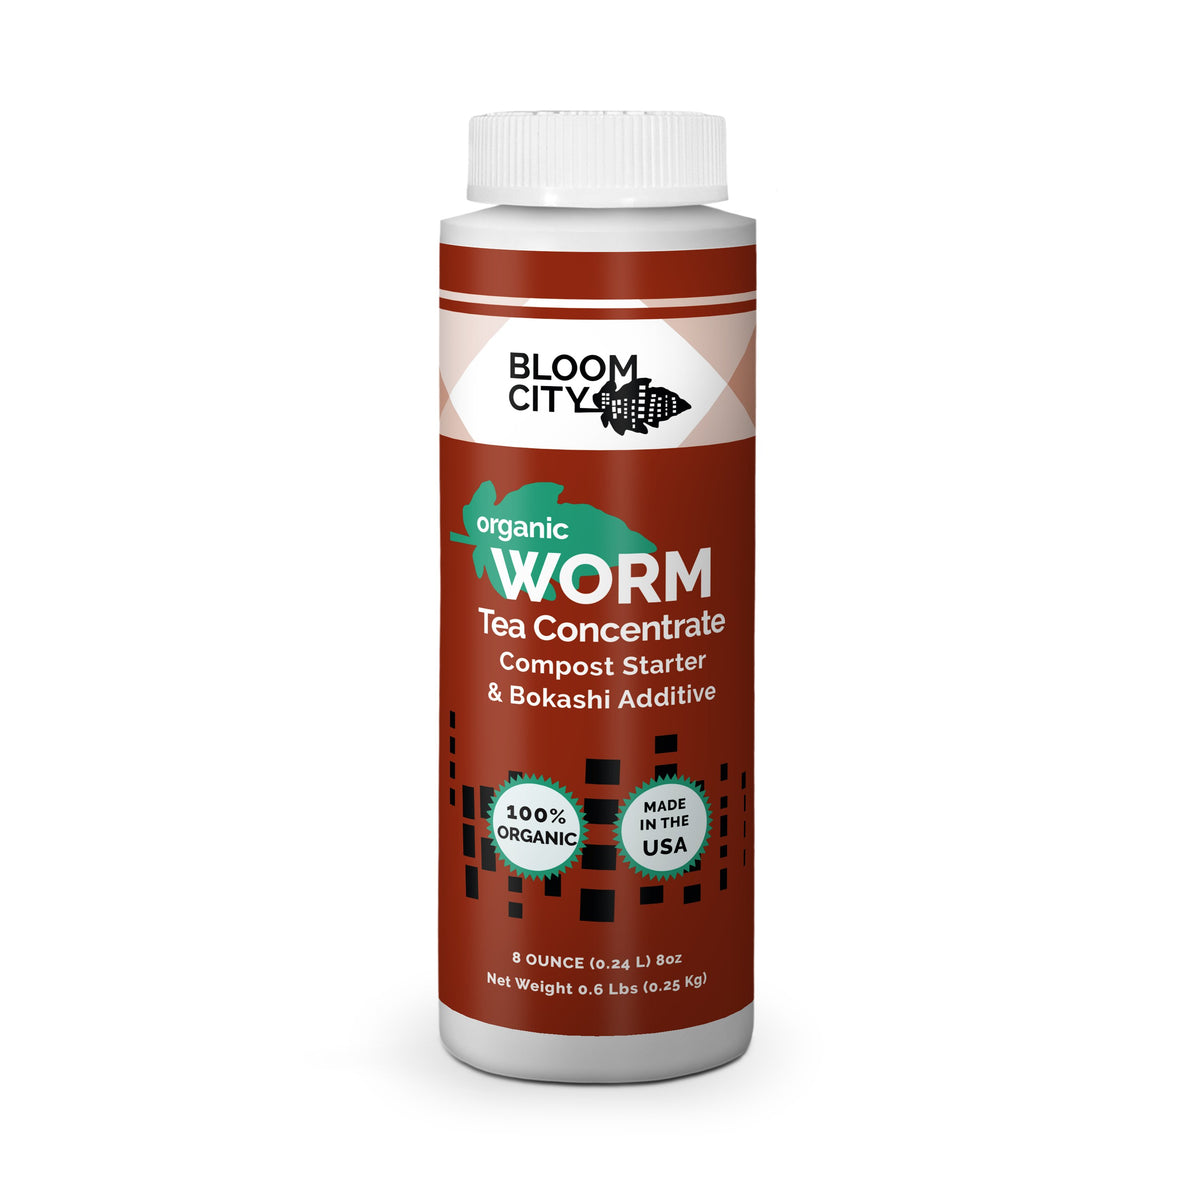 Casepack - Worm Tea Concentrate